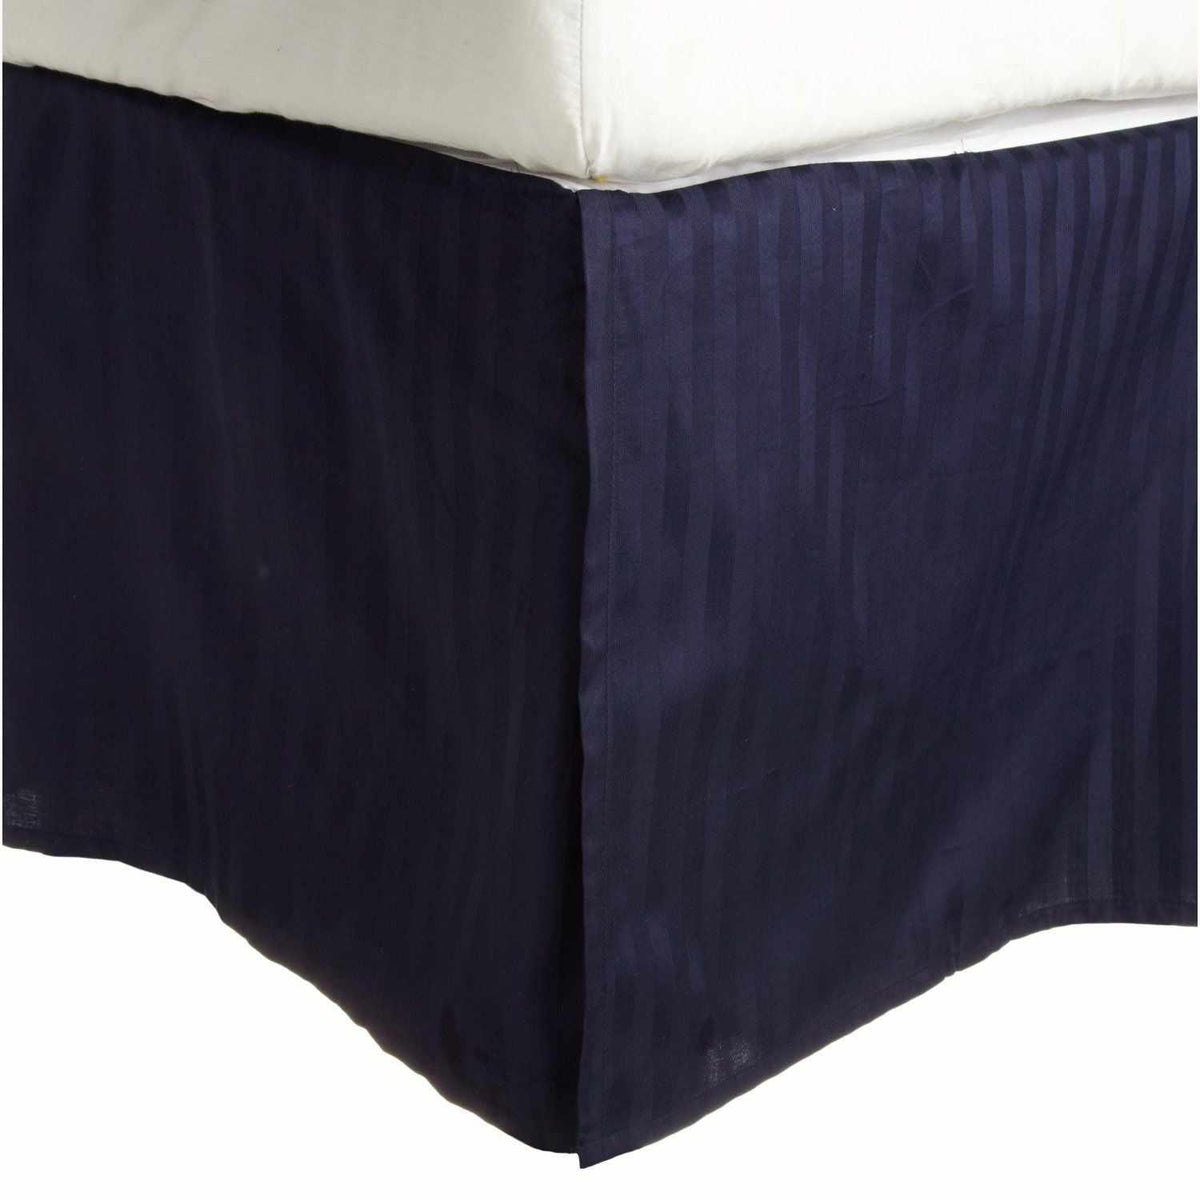 300-Thread Count Egyptian Cotton 15" Drop Striped Bed Skirt - Navy Blue